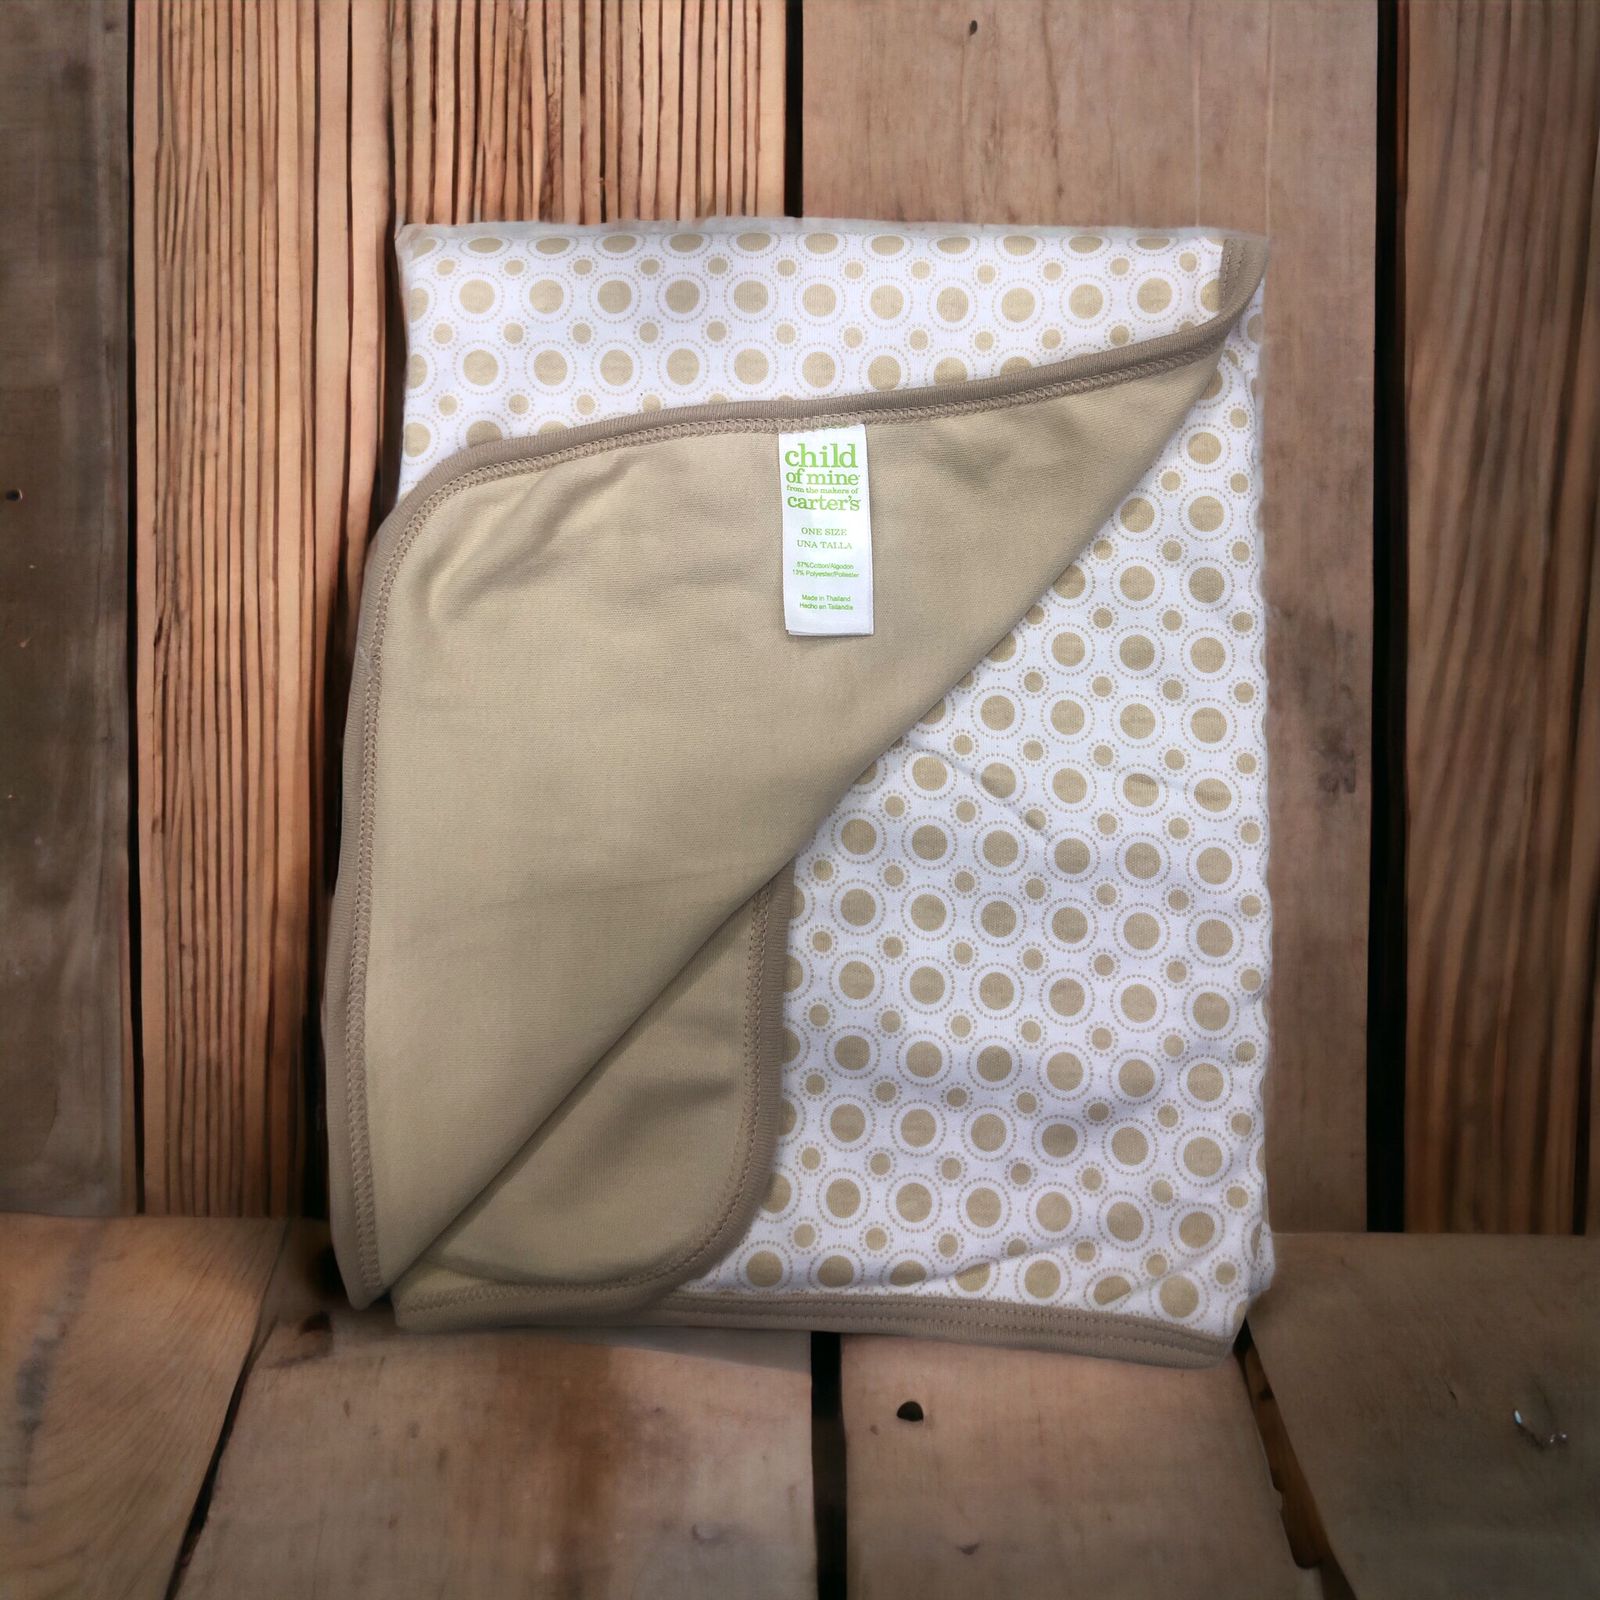 New cotton wrapping blankets